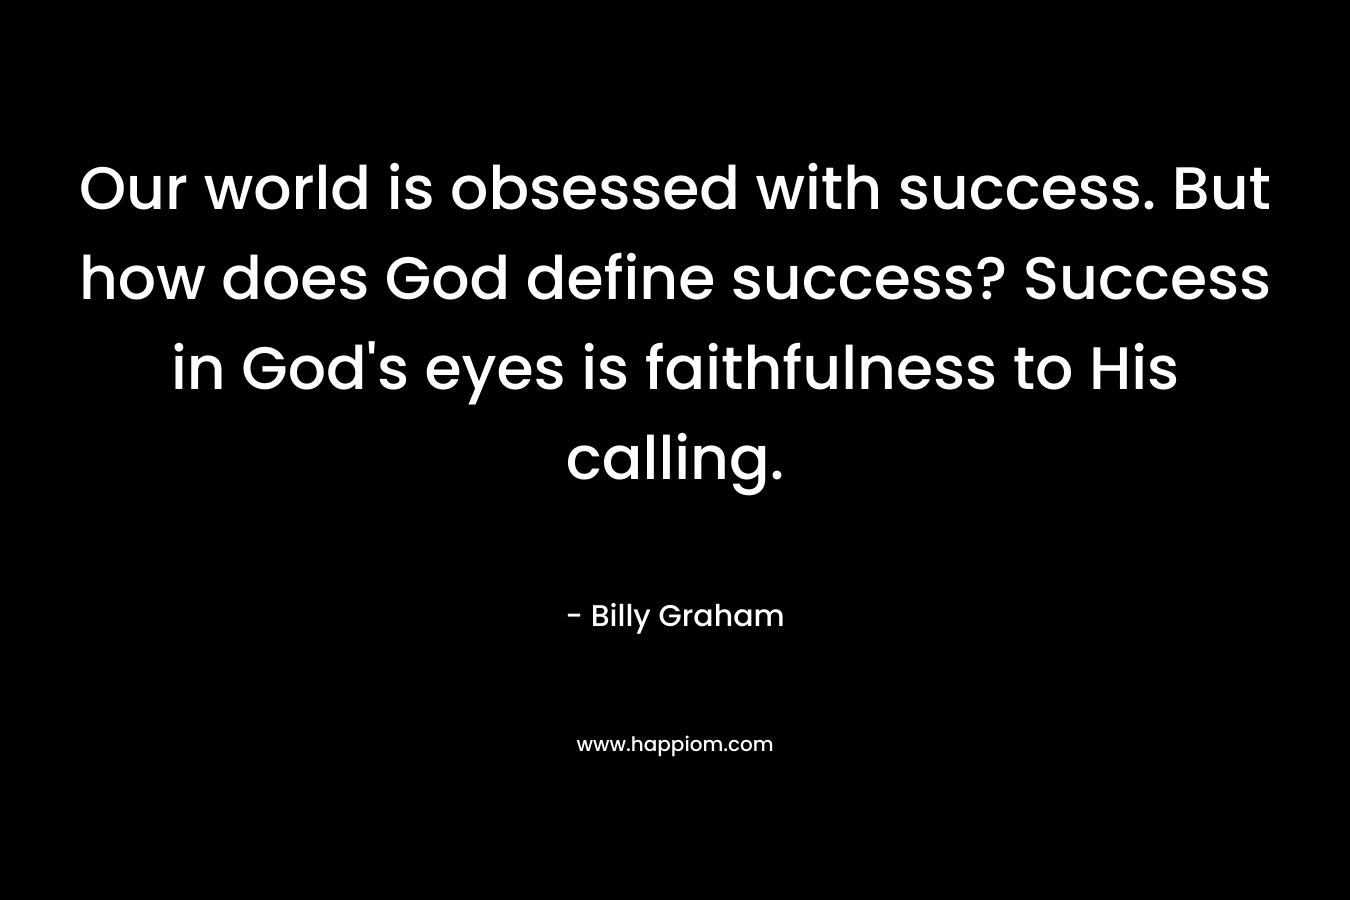 Our world is obsessed with success. But how does God define success? Success in God's eyes is faithfulness to His calling.